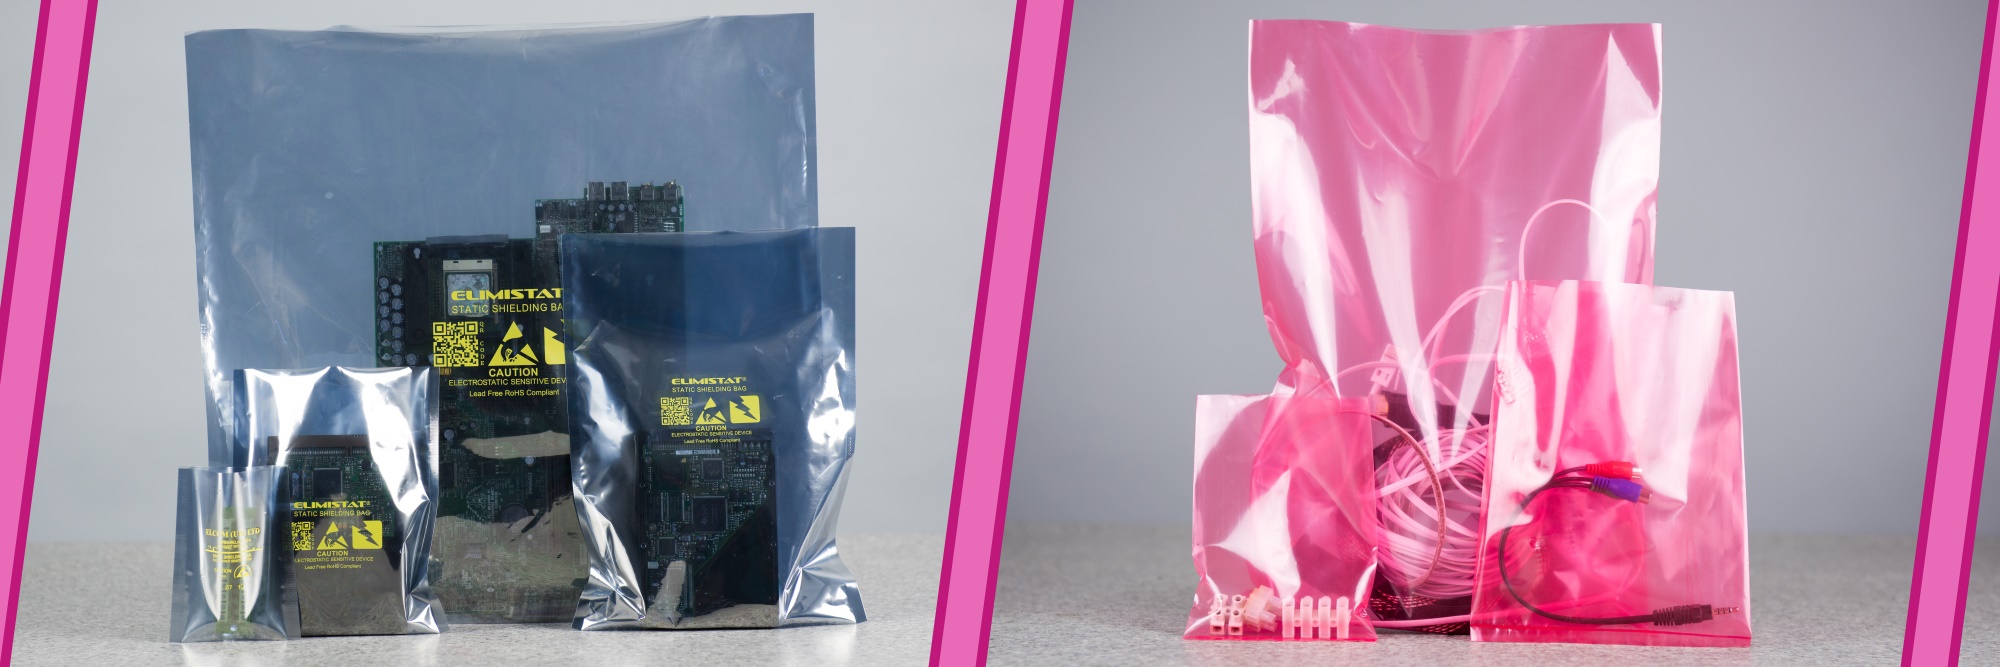 https://www.polybags.co.uk/assets/packaging/images/esd-antistatic-bags.jpg